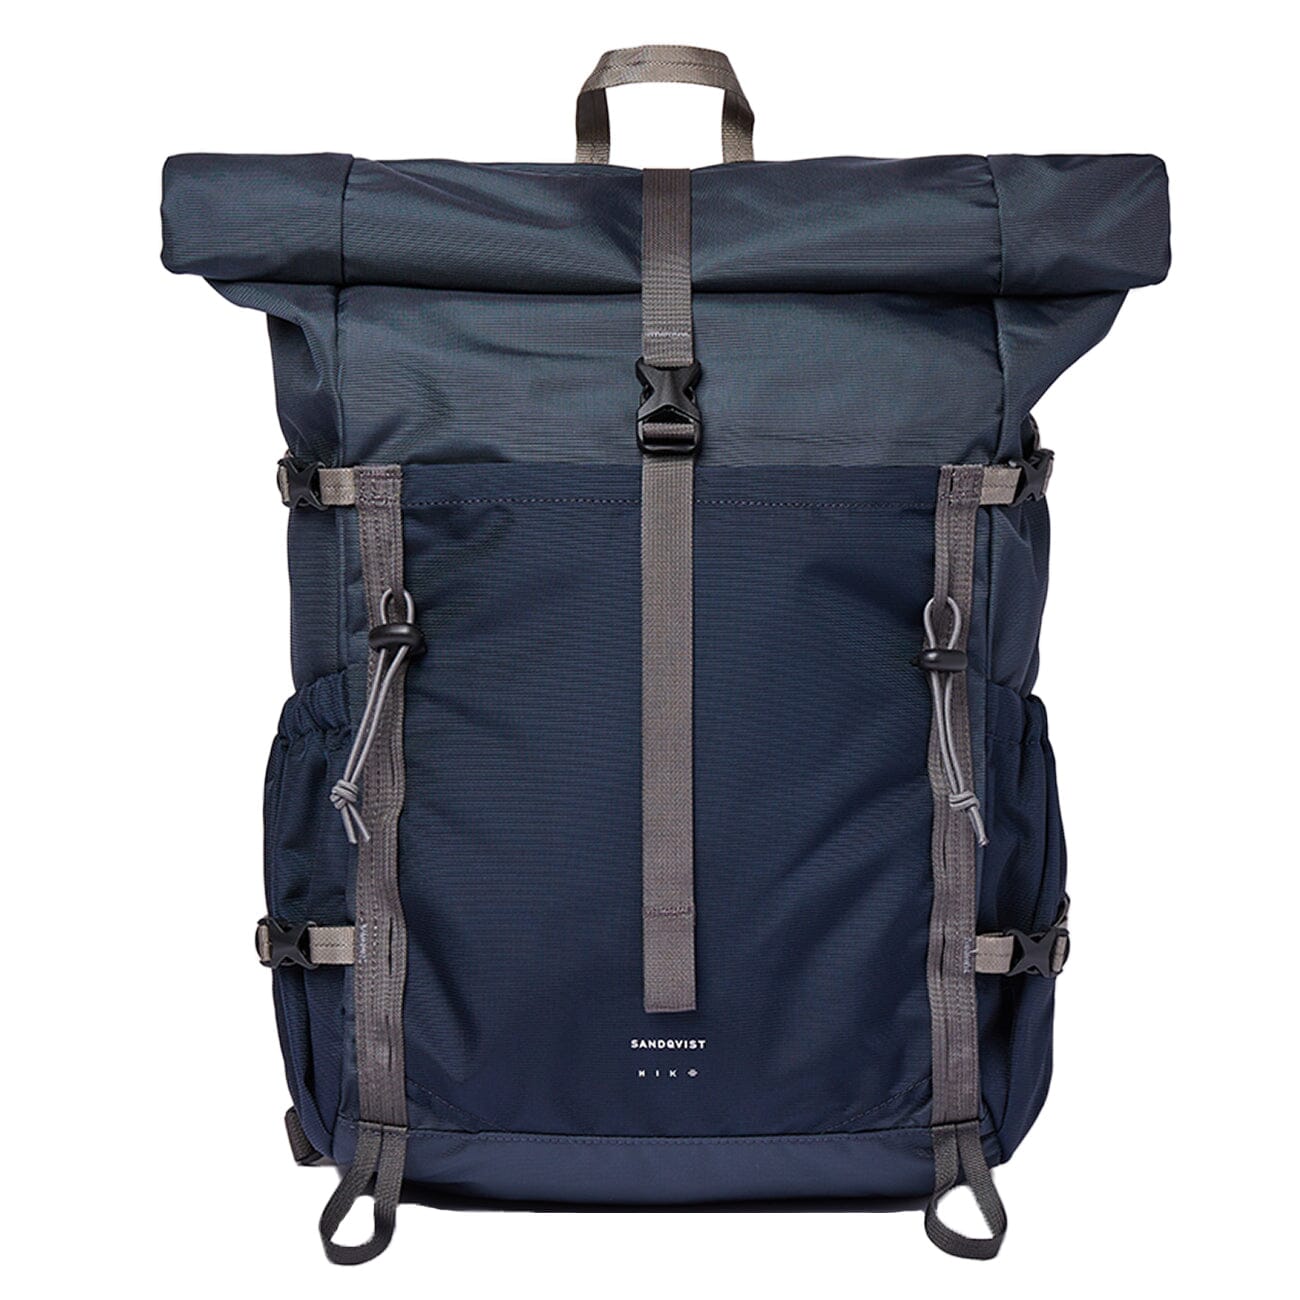 day hiking backpack navy blue recycled nylon